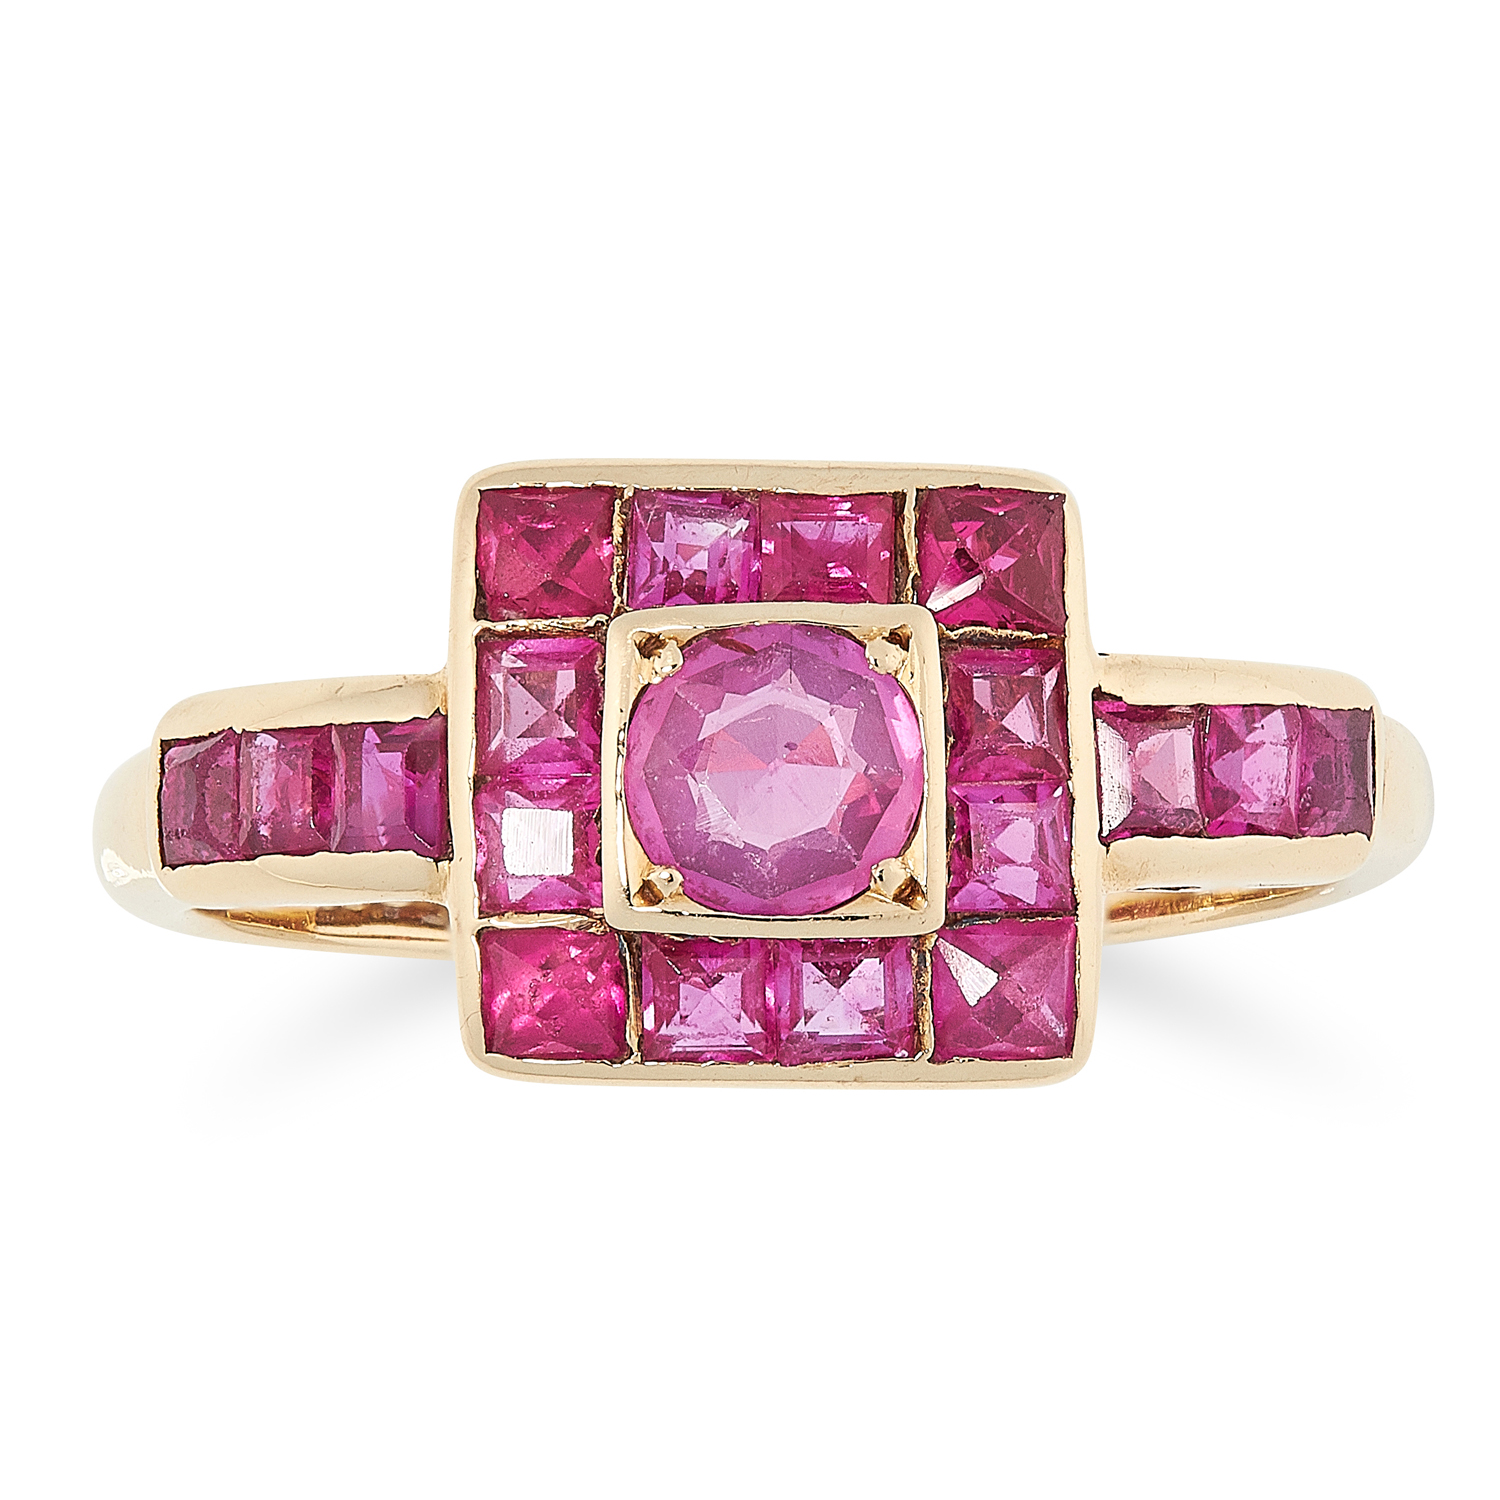 A RUBY CLUSTER DRESS RING, CIRCA 1950 in 18ct yellow gold, set with a central round cut ruby